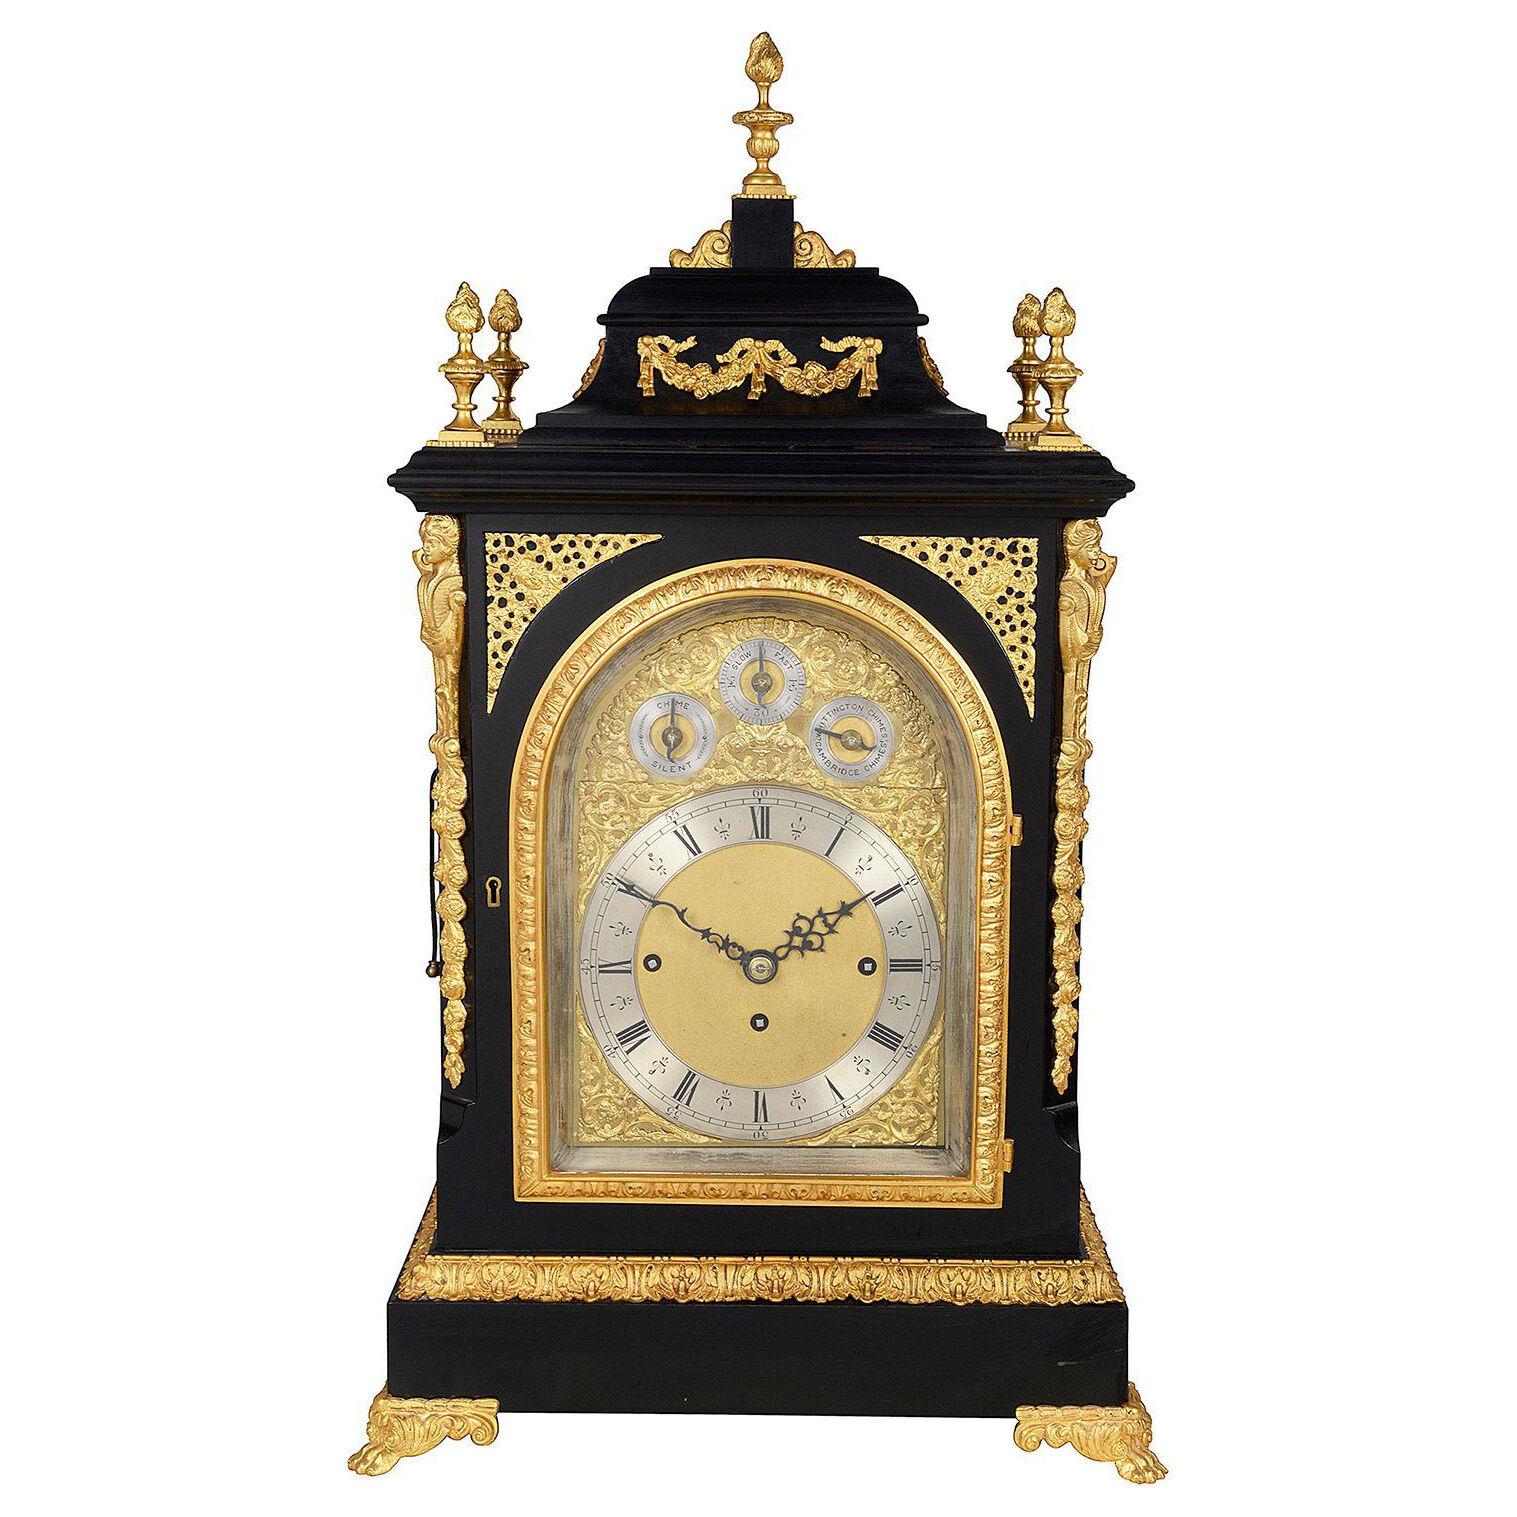 19th Century English, Westminster chiming mantel clock.